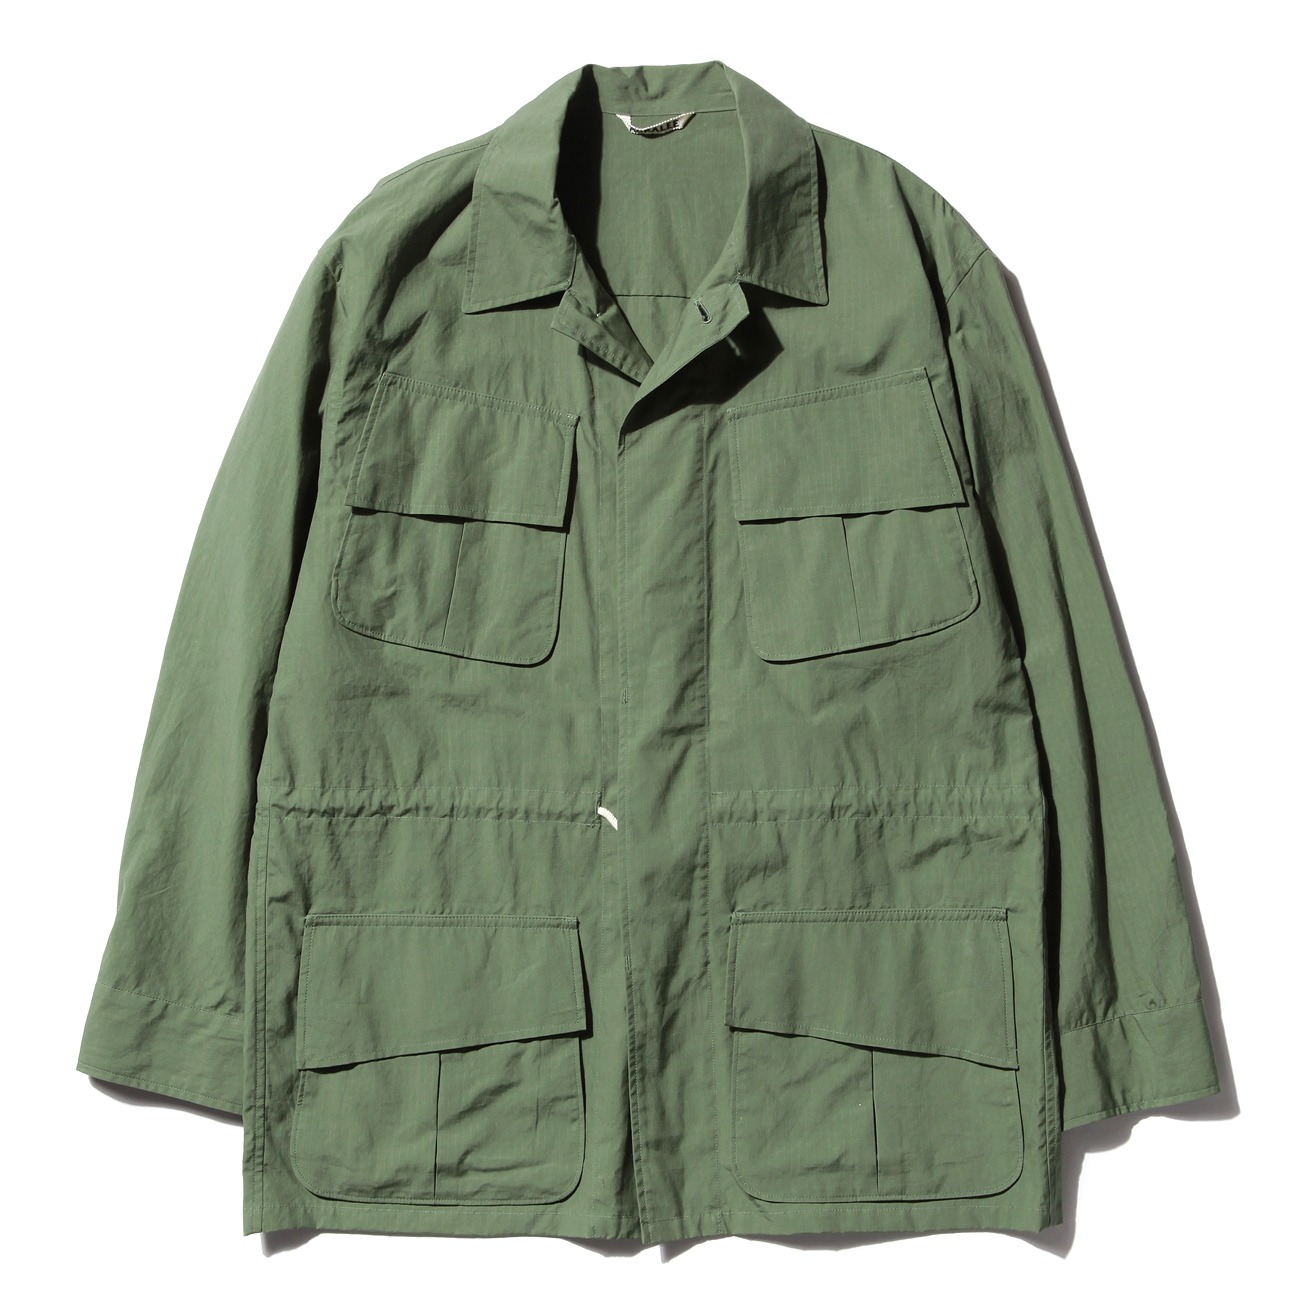 WASHED FINX RIPSTOP FATIGUE JACKET (メンズ) - Olive Green